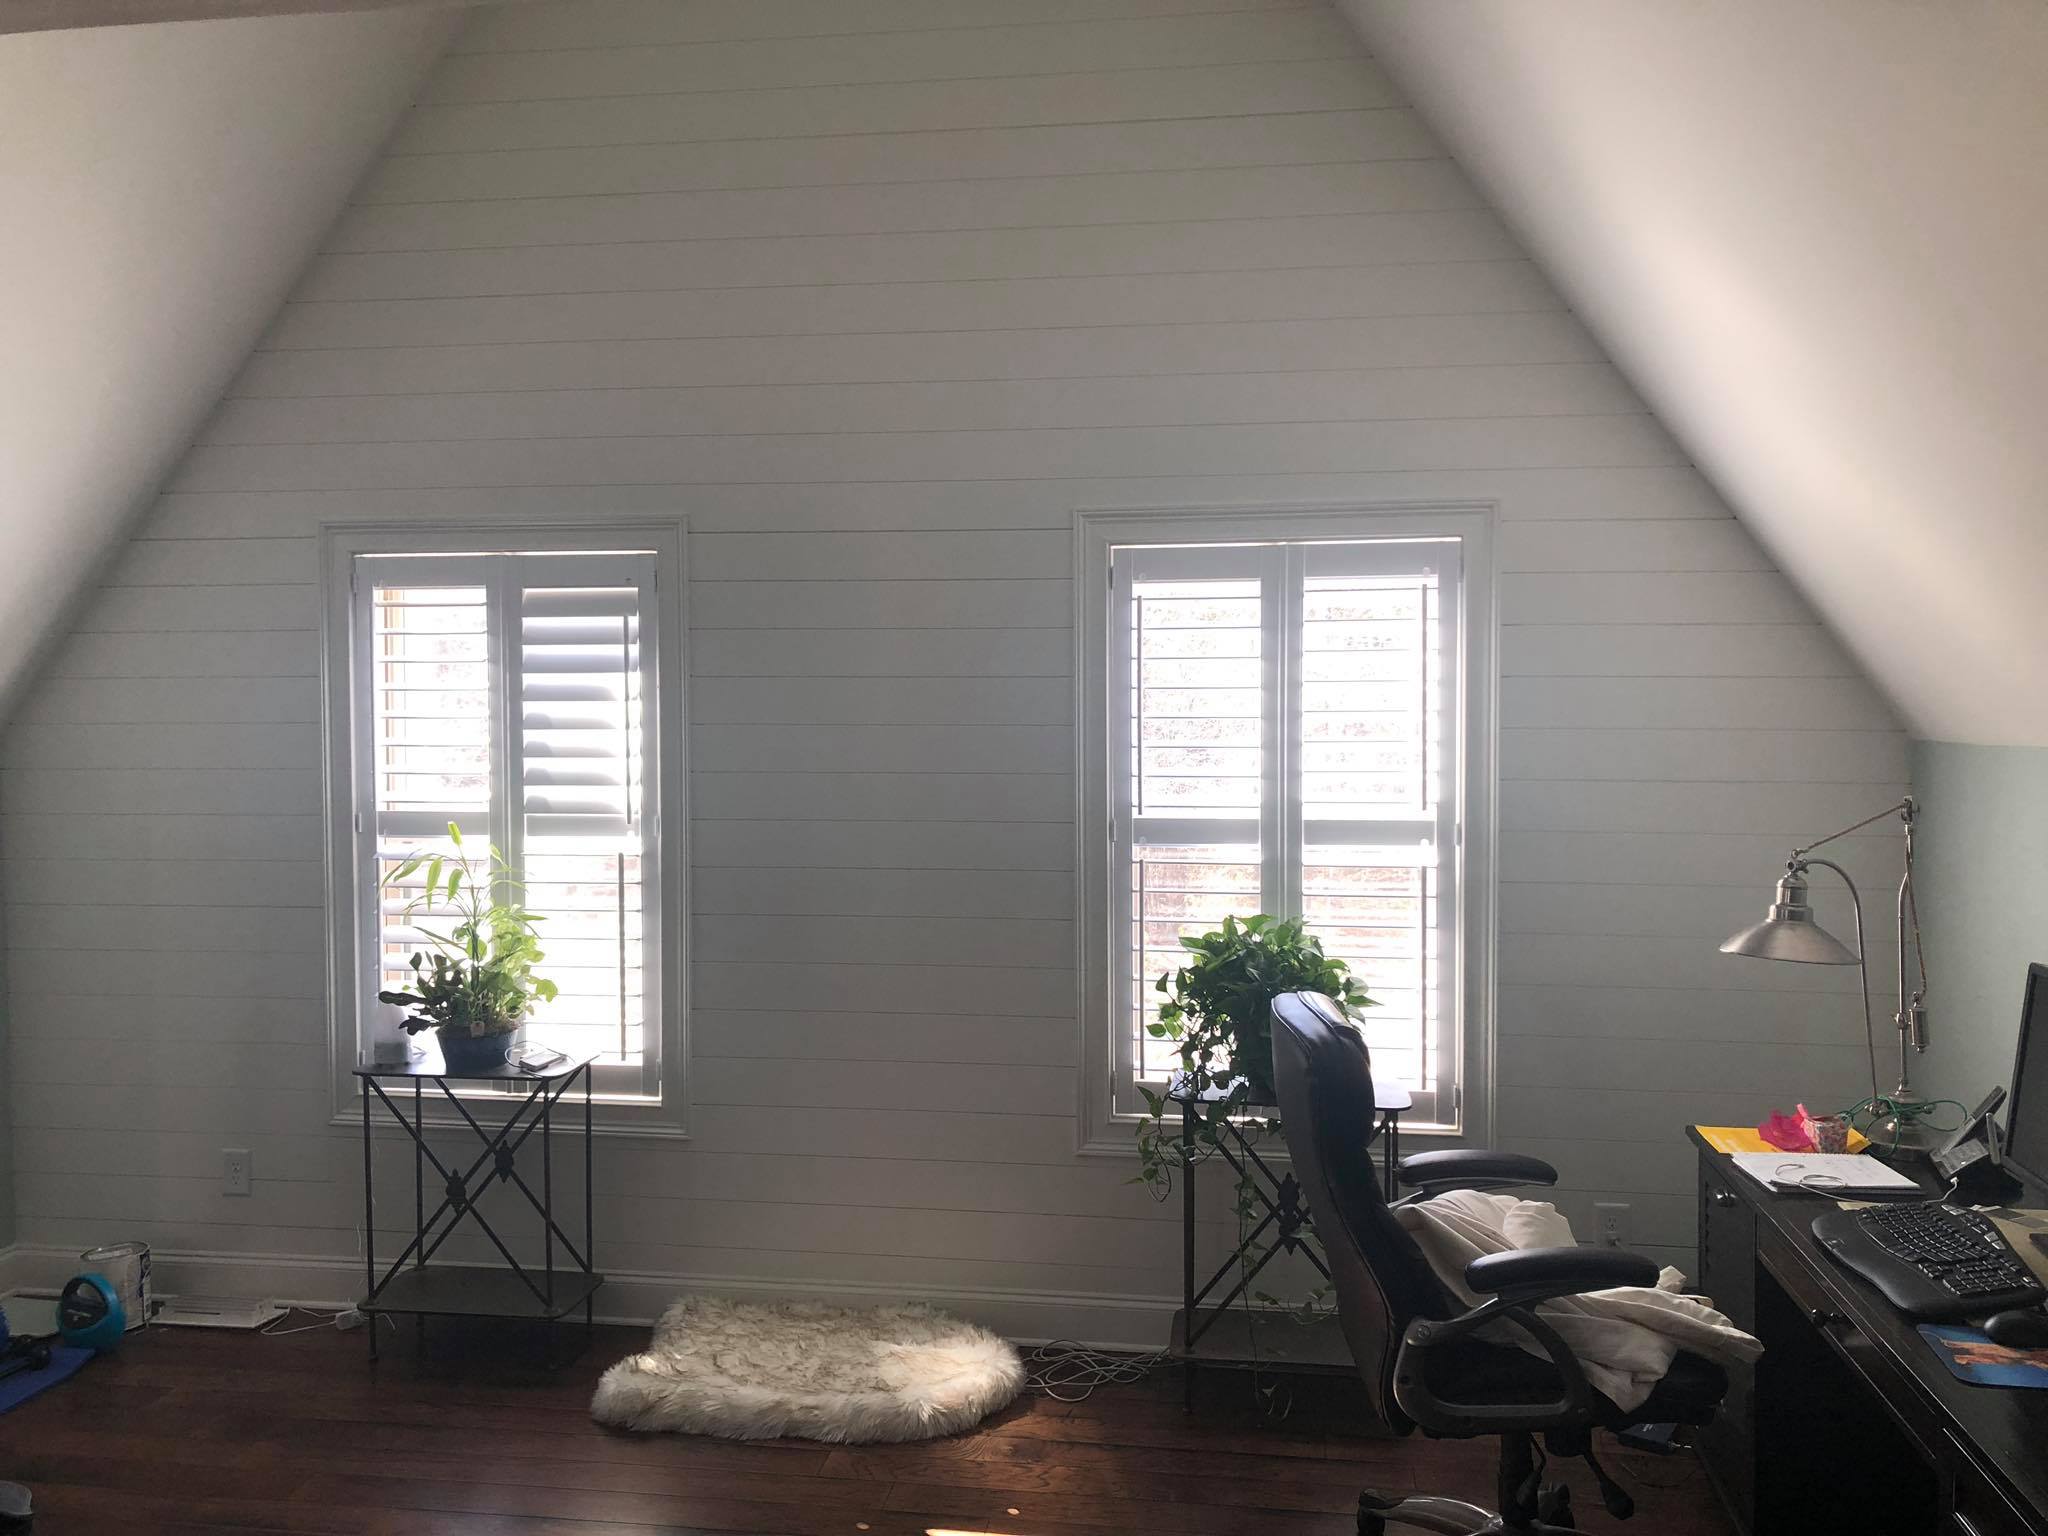 Shiplap On Walls Painted White with Hardwood Floor Installed 4